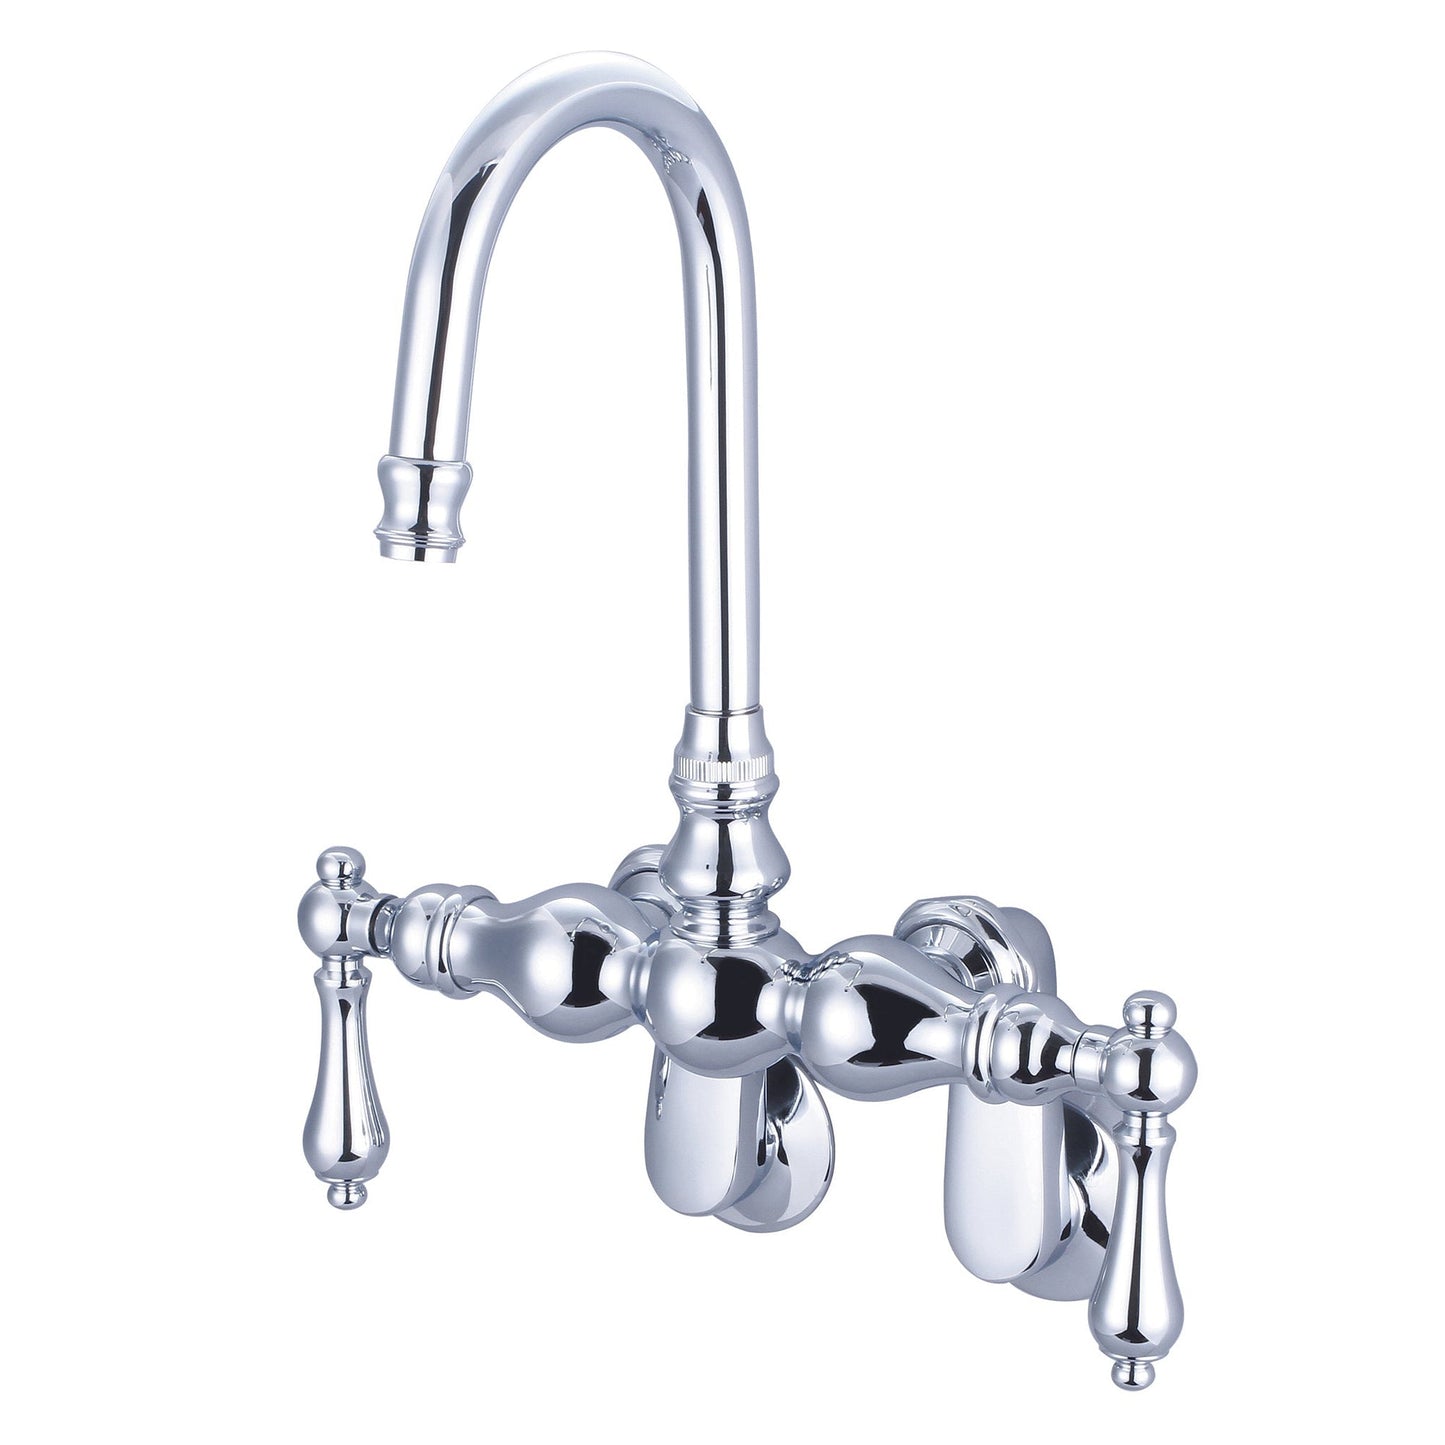 Water Creation Vintage Classic Adjustable Spread Wall Mount Tub F6-0015 9.25" Silver Solid Brass Faucet With Gooseneck Spout And Swivel Wall Connector And Metal Lever Handles Without Labels